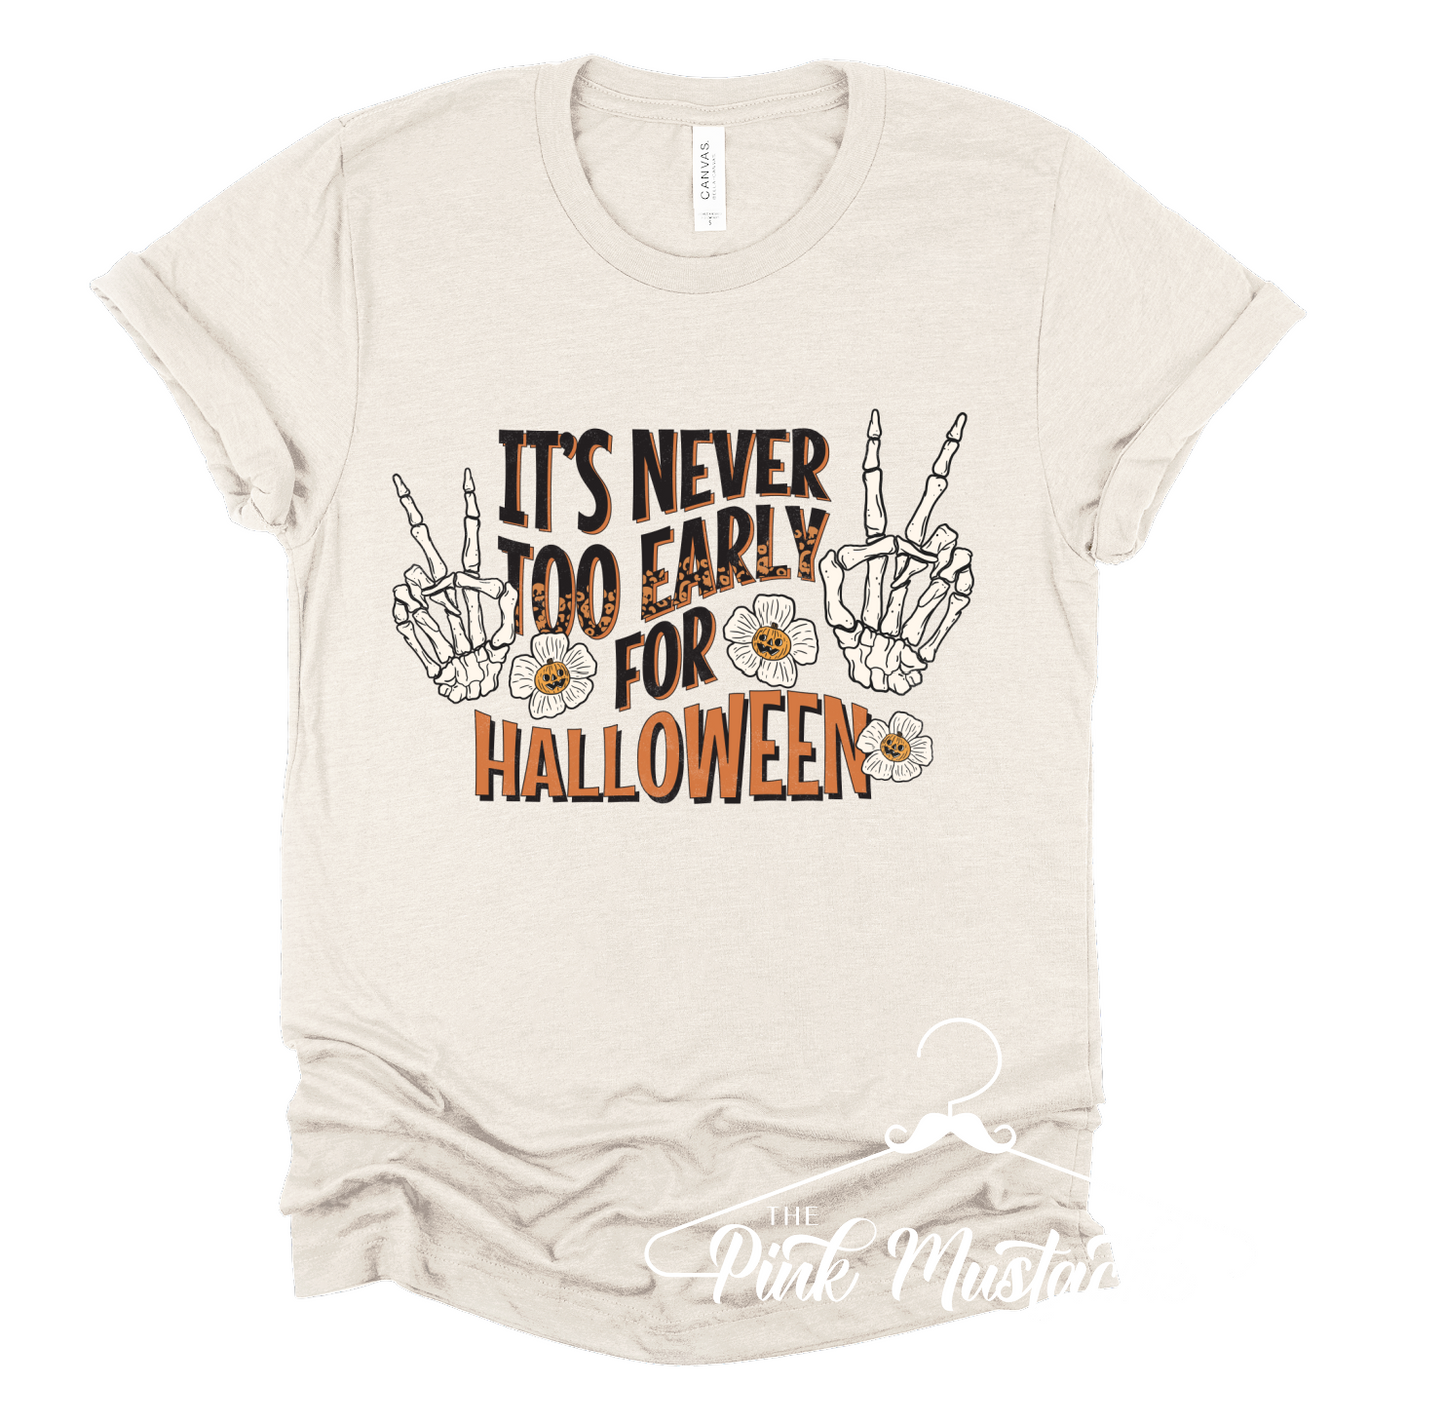 It's Never Too Early for Halloween Shirt/ Softstyle Tee/ Toddler, Youth And Adult Sizes Available